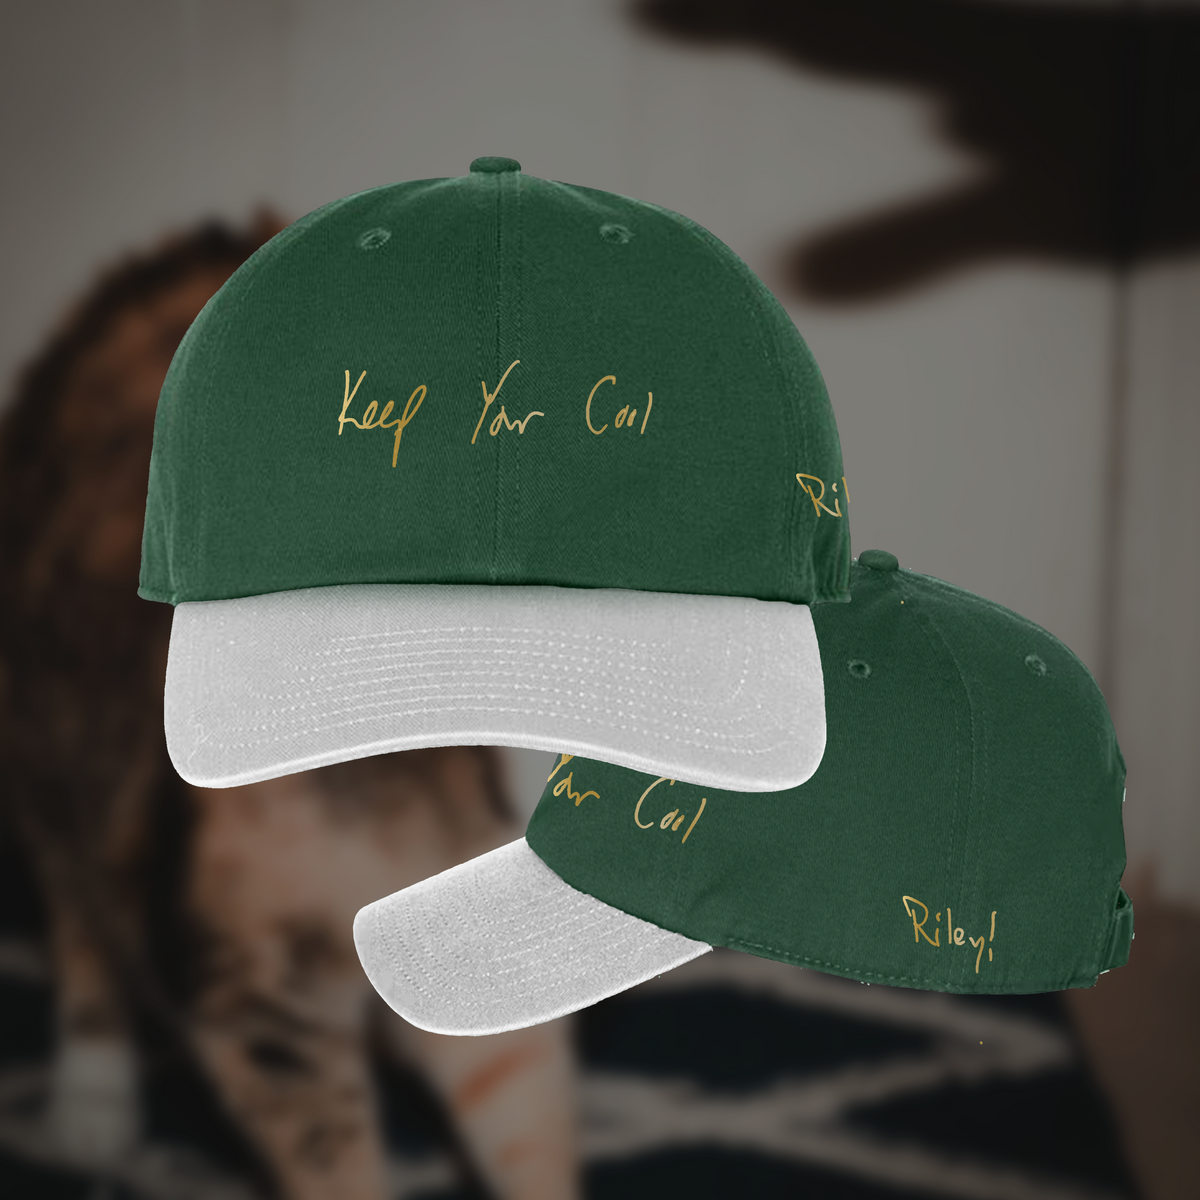 Riley! - Embroidered Hat